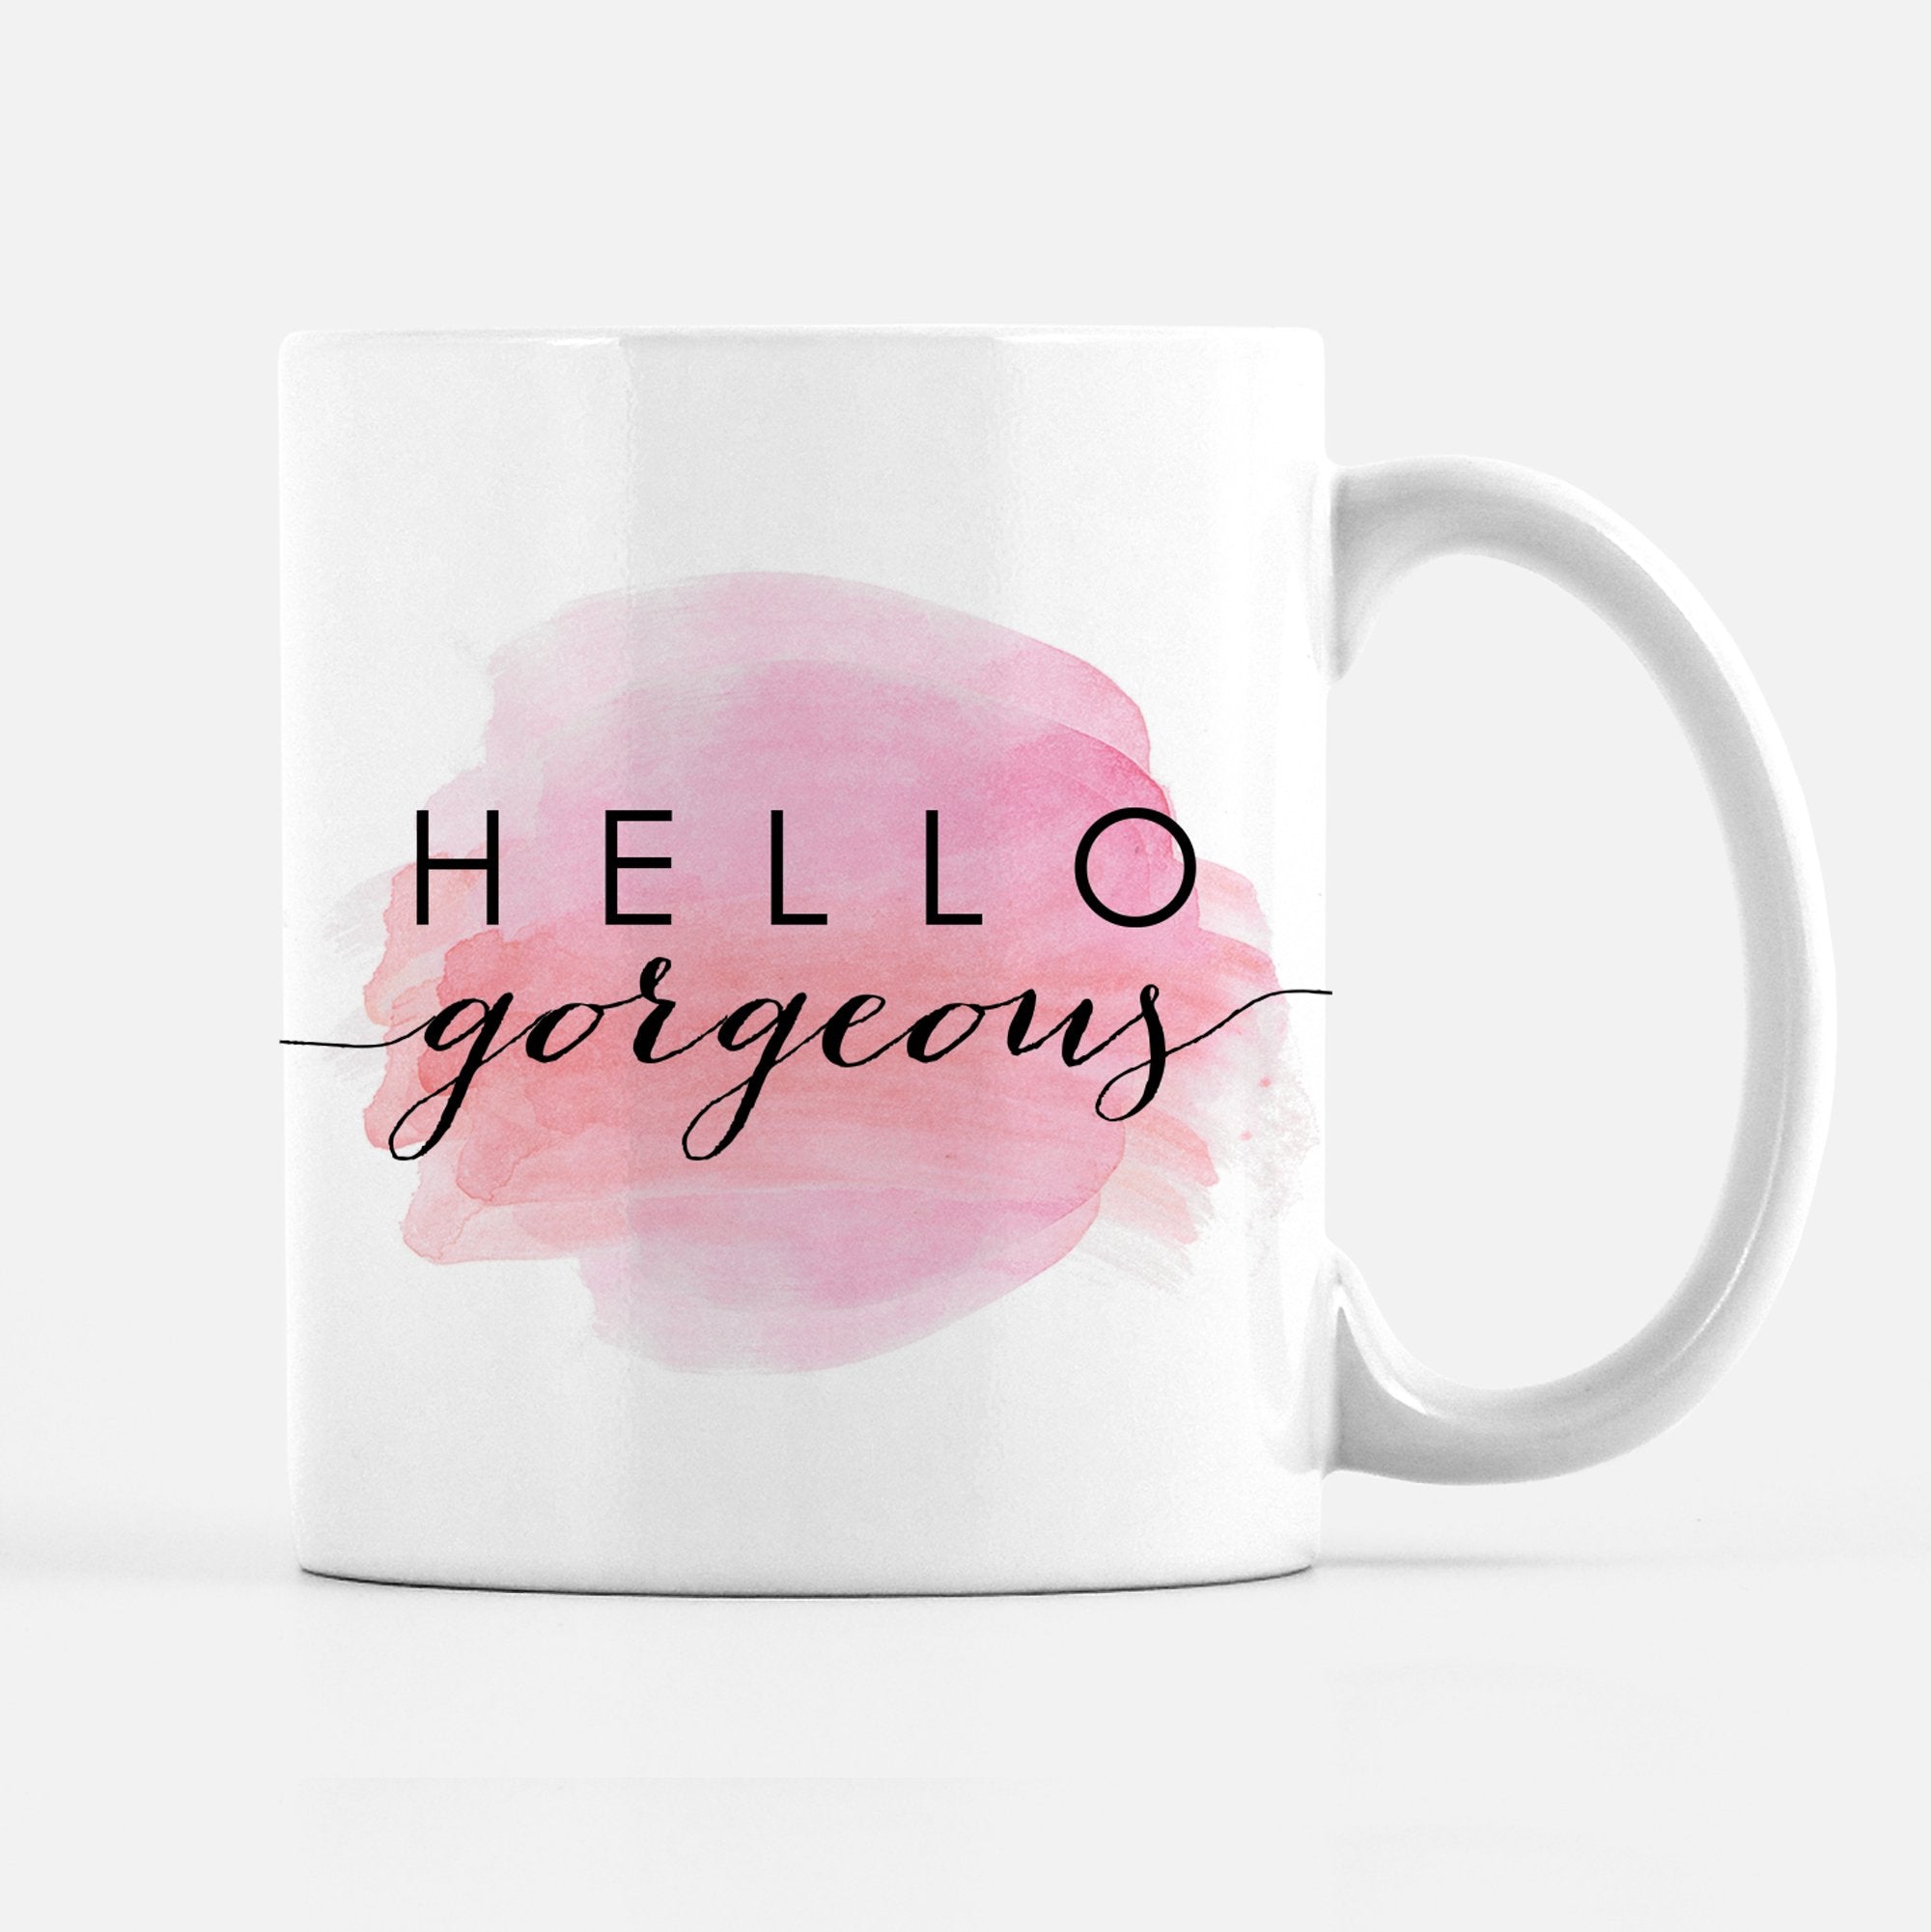 Hello Lovely Coffee Mug for Women - Cute Rose Pink and Gold Cups